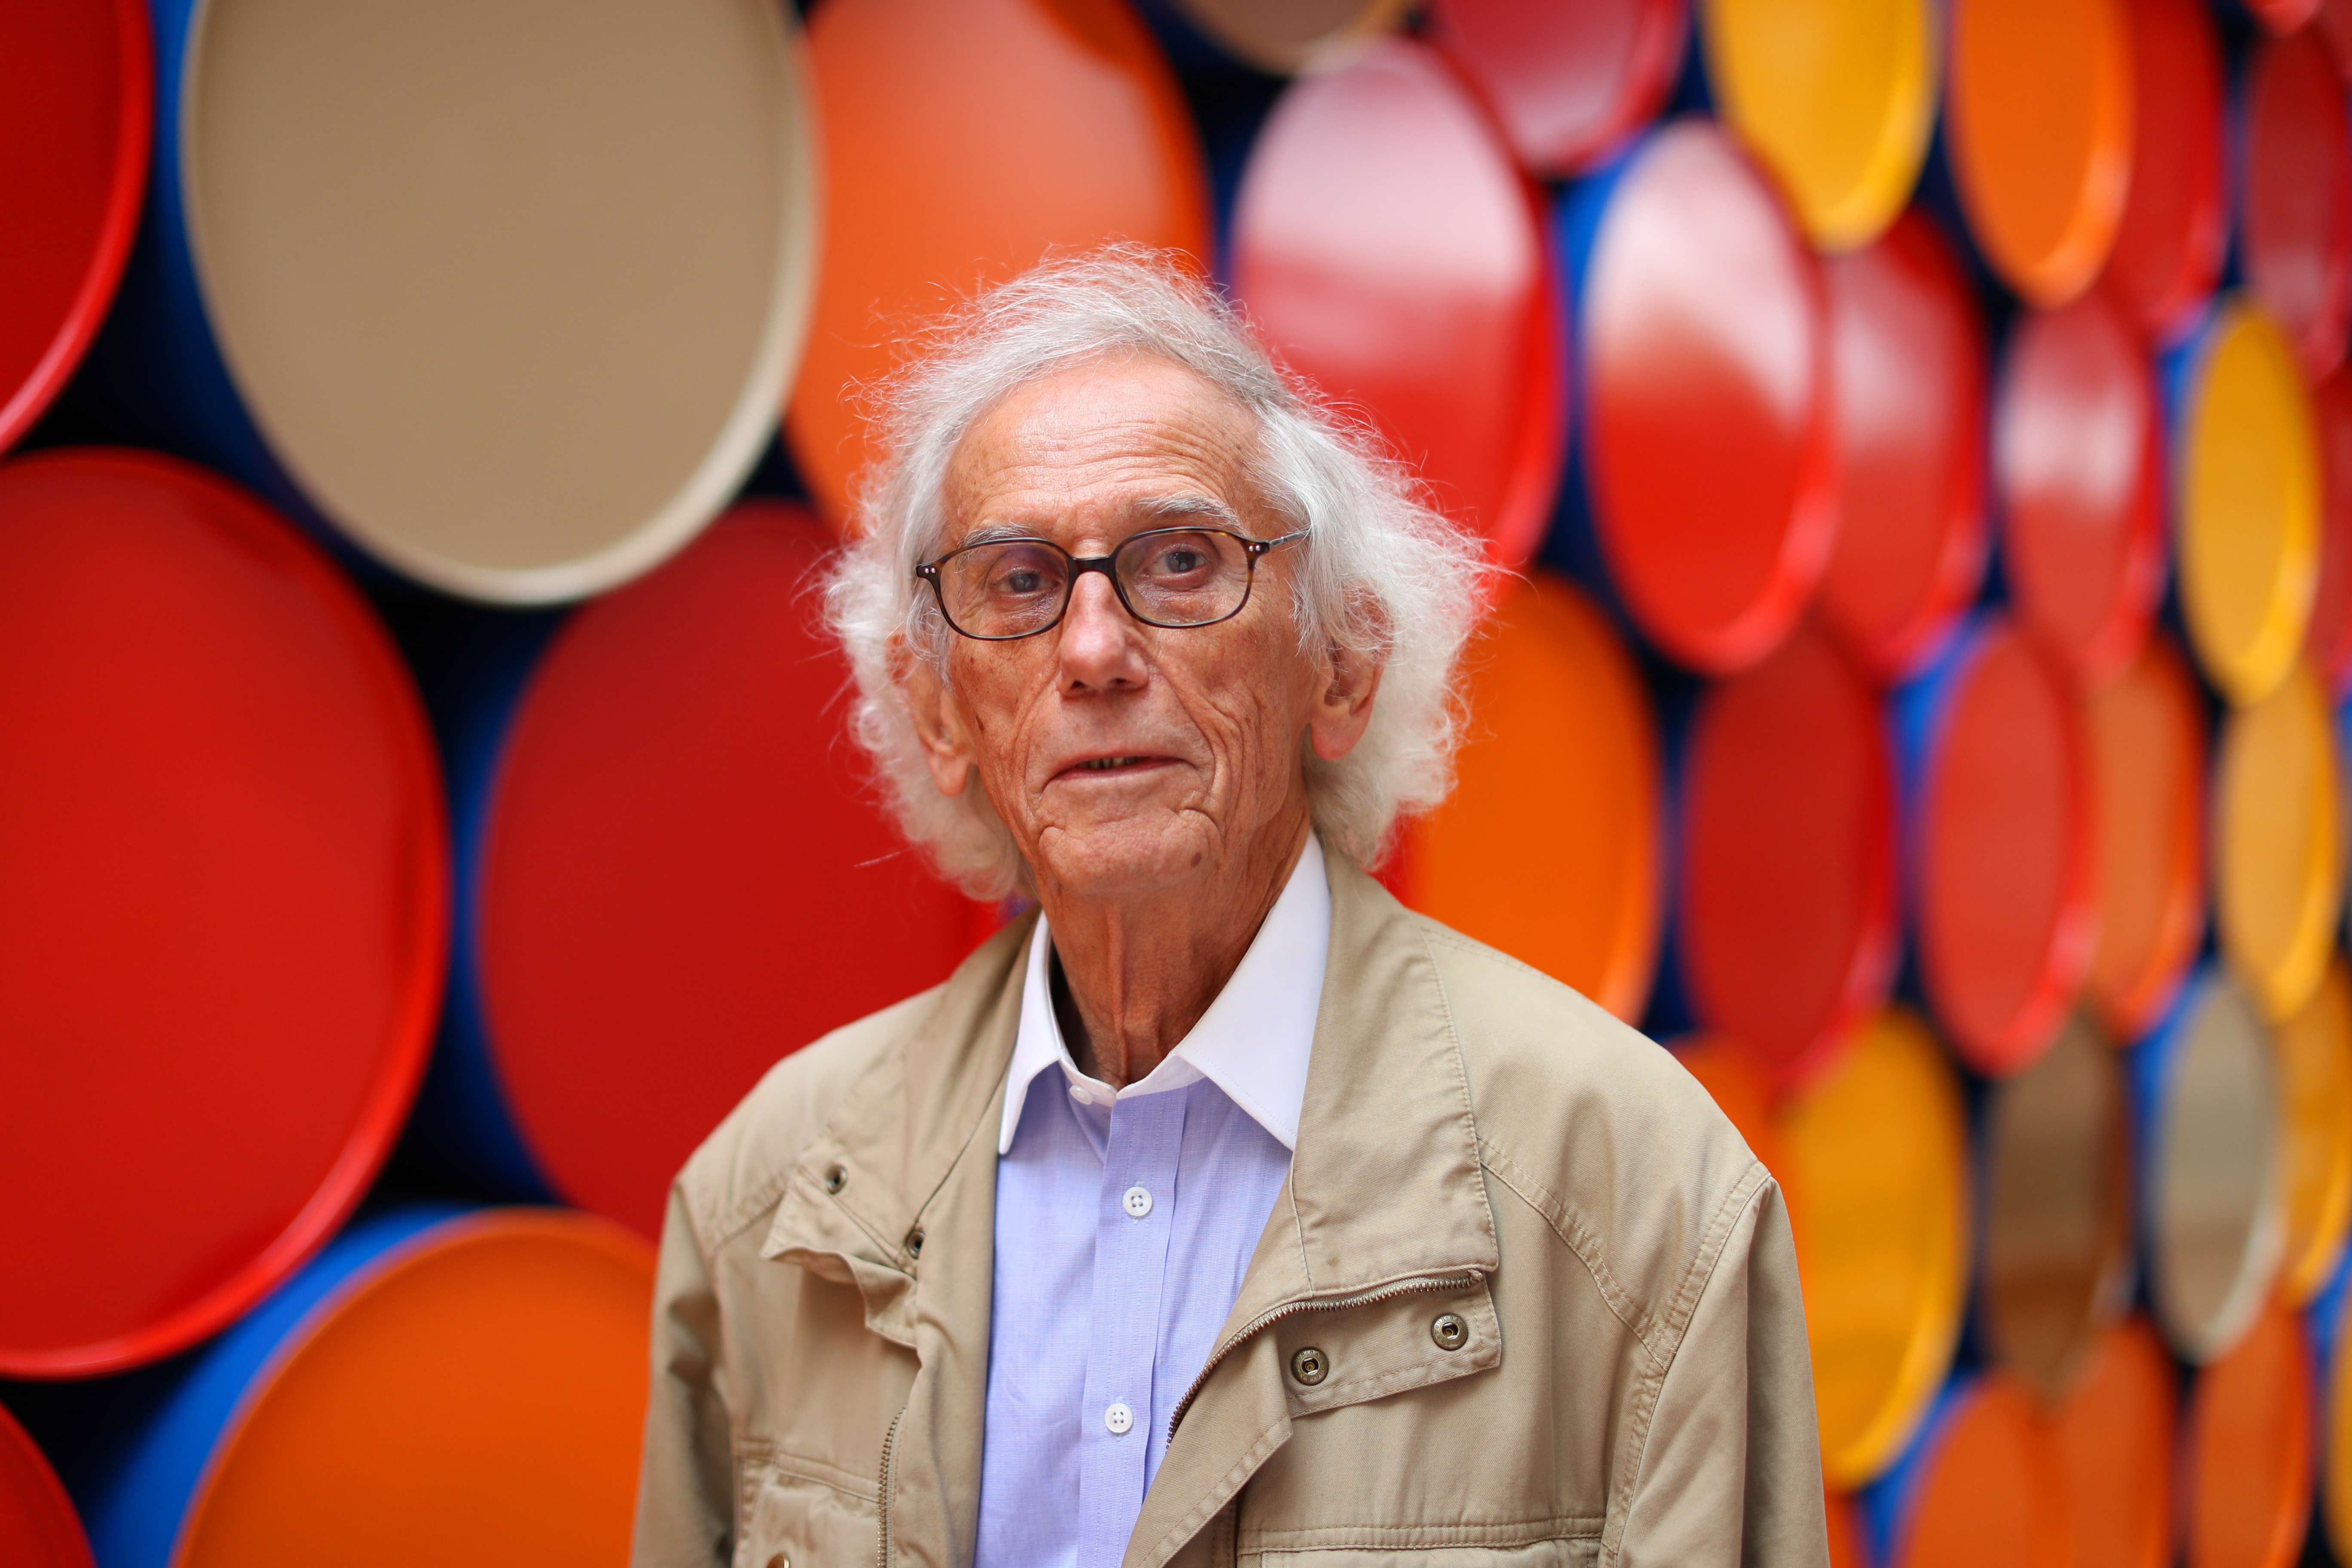 Bulgarian-born Christo, once a refugee, says he scrapped long-planned US project because of ‘that man’, and tells of his hope he can sell art in Hong Kong to fund 150-metre-high sculpture in UAE he planned with his late wife